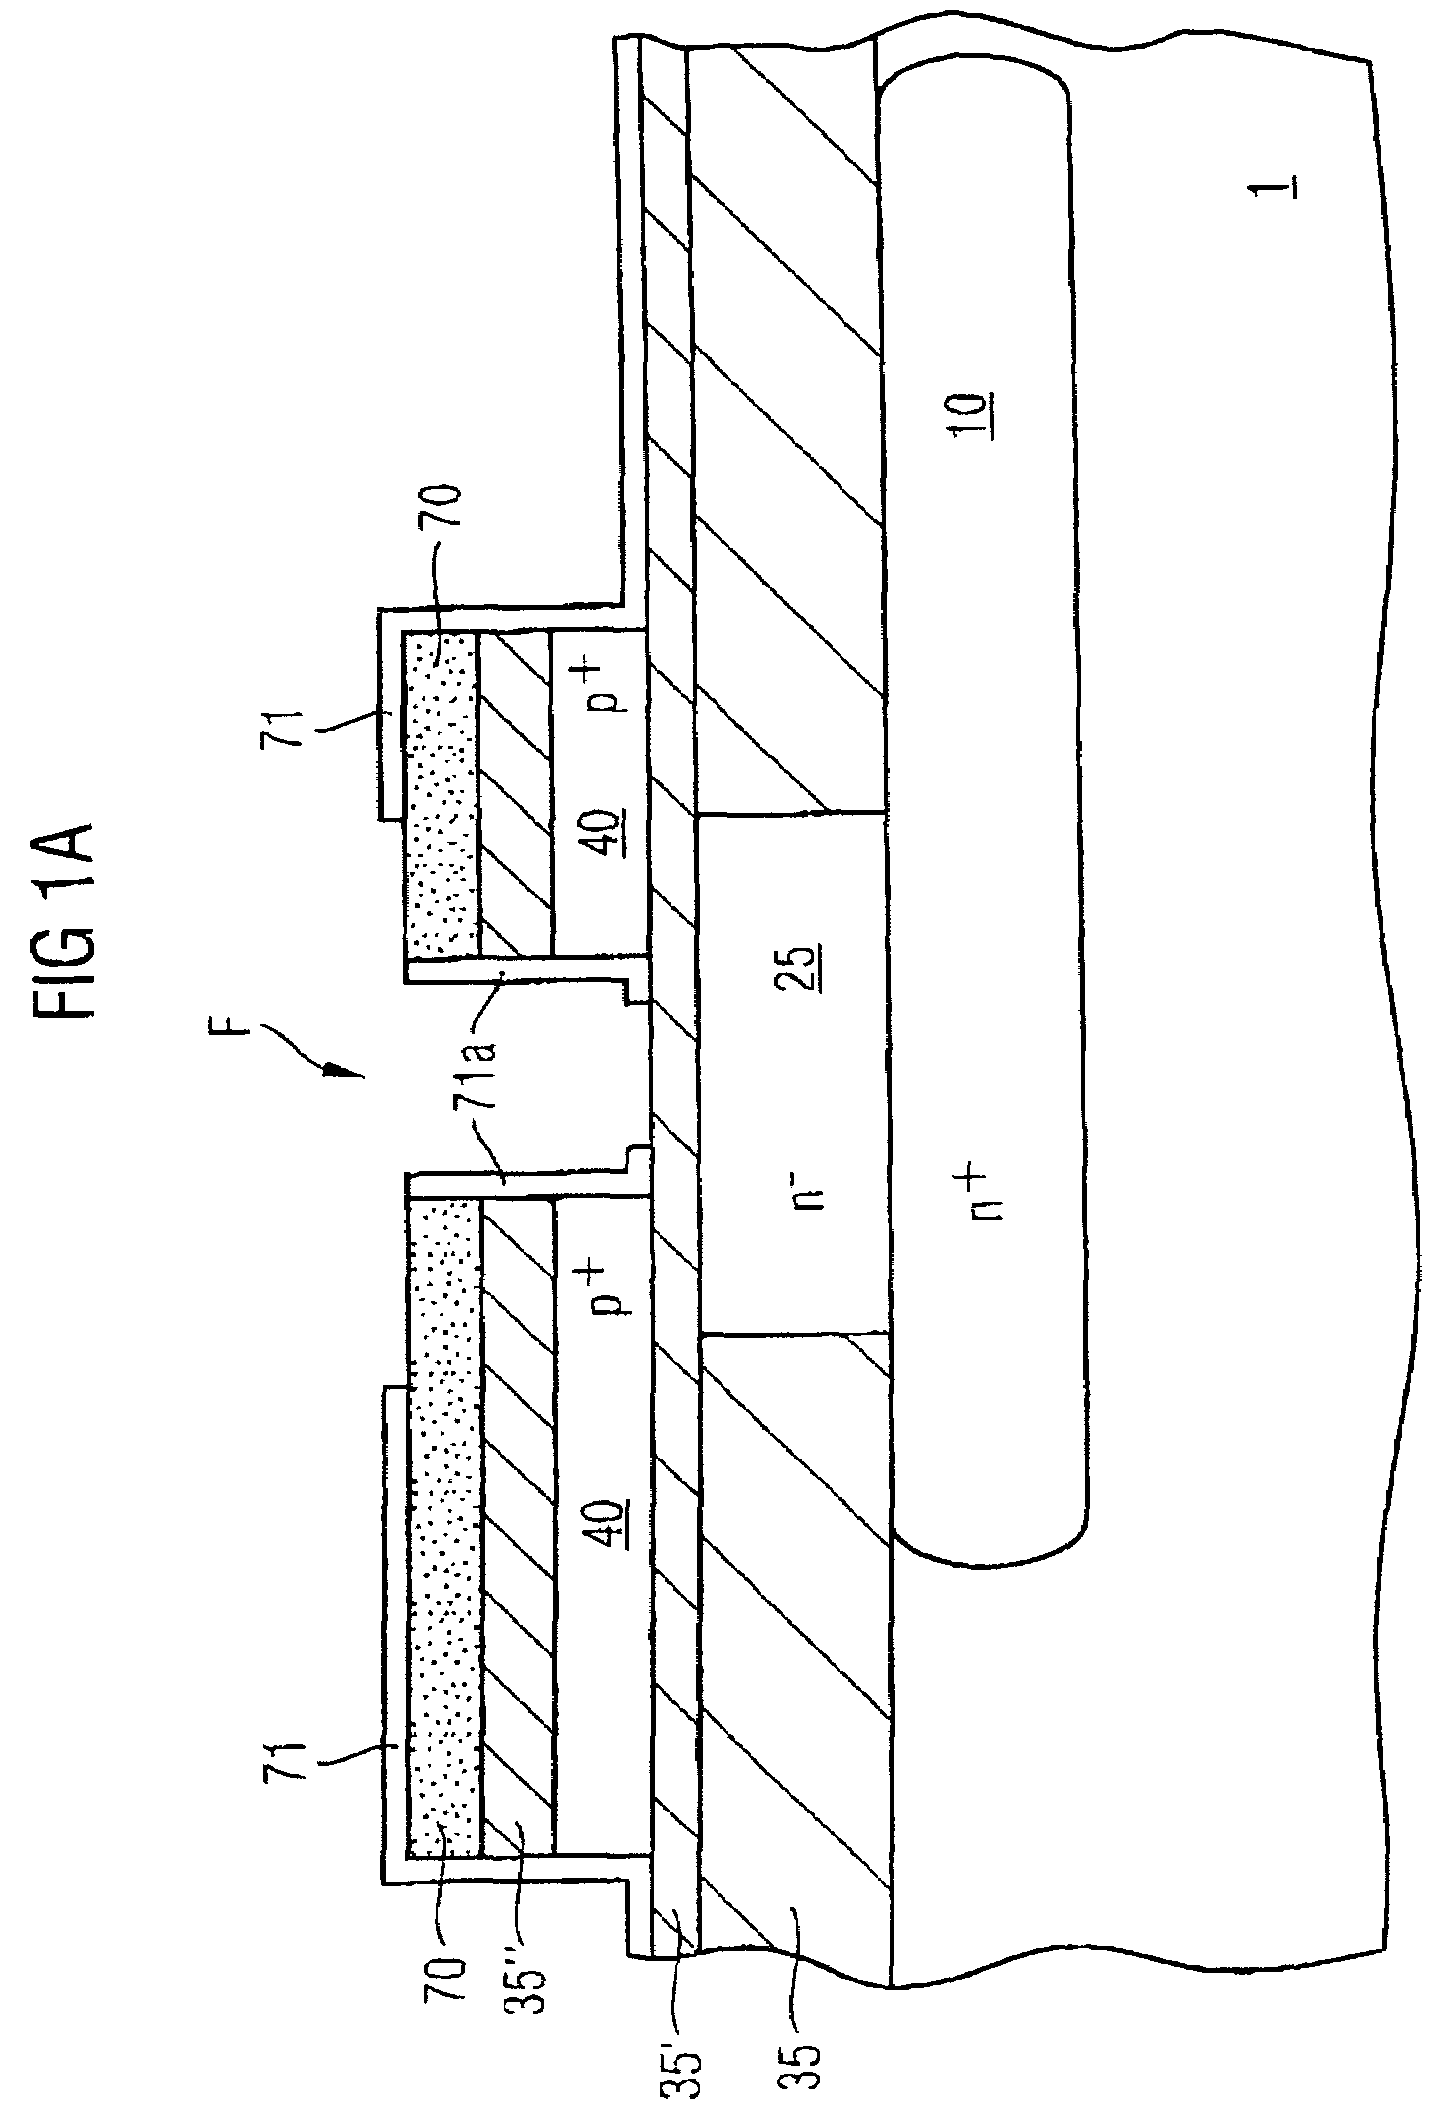 Method for the production of a bipolar semiconductor component, especially a bipolar transistor, and corresponding bipolar semiconductor component